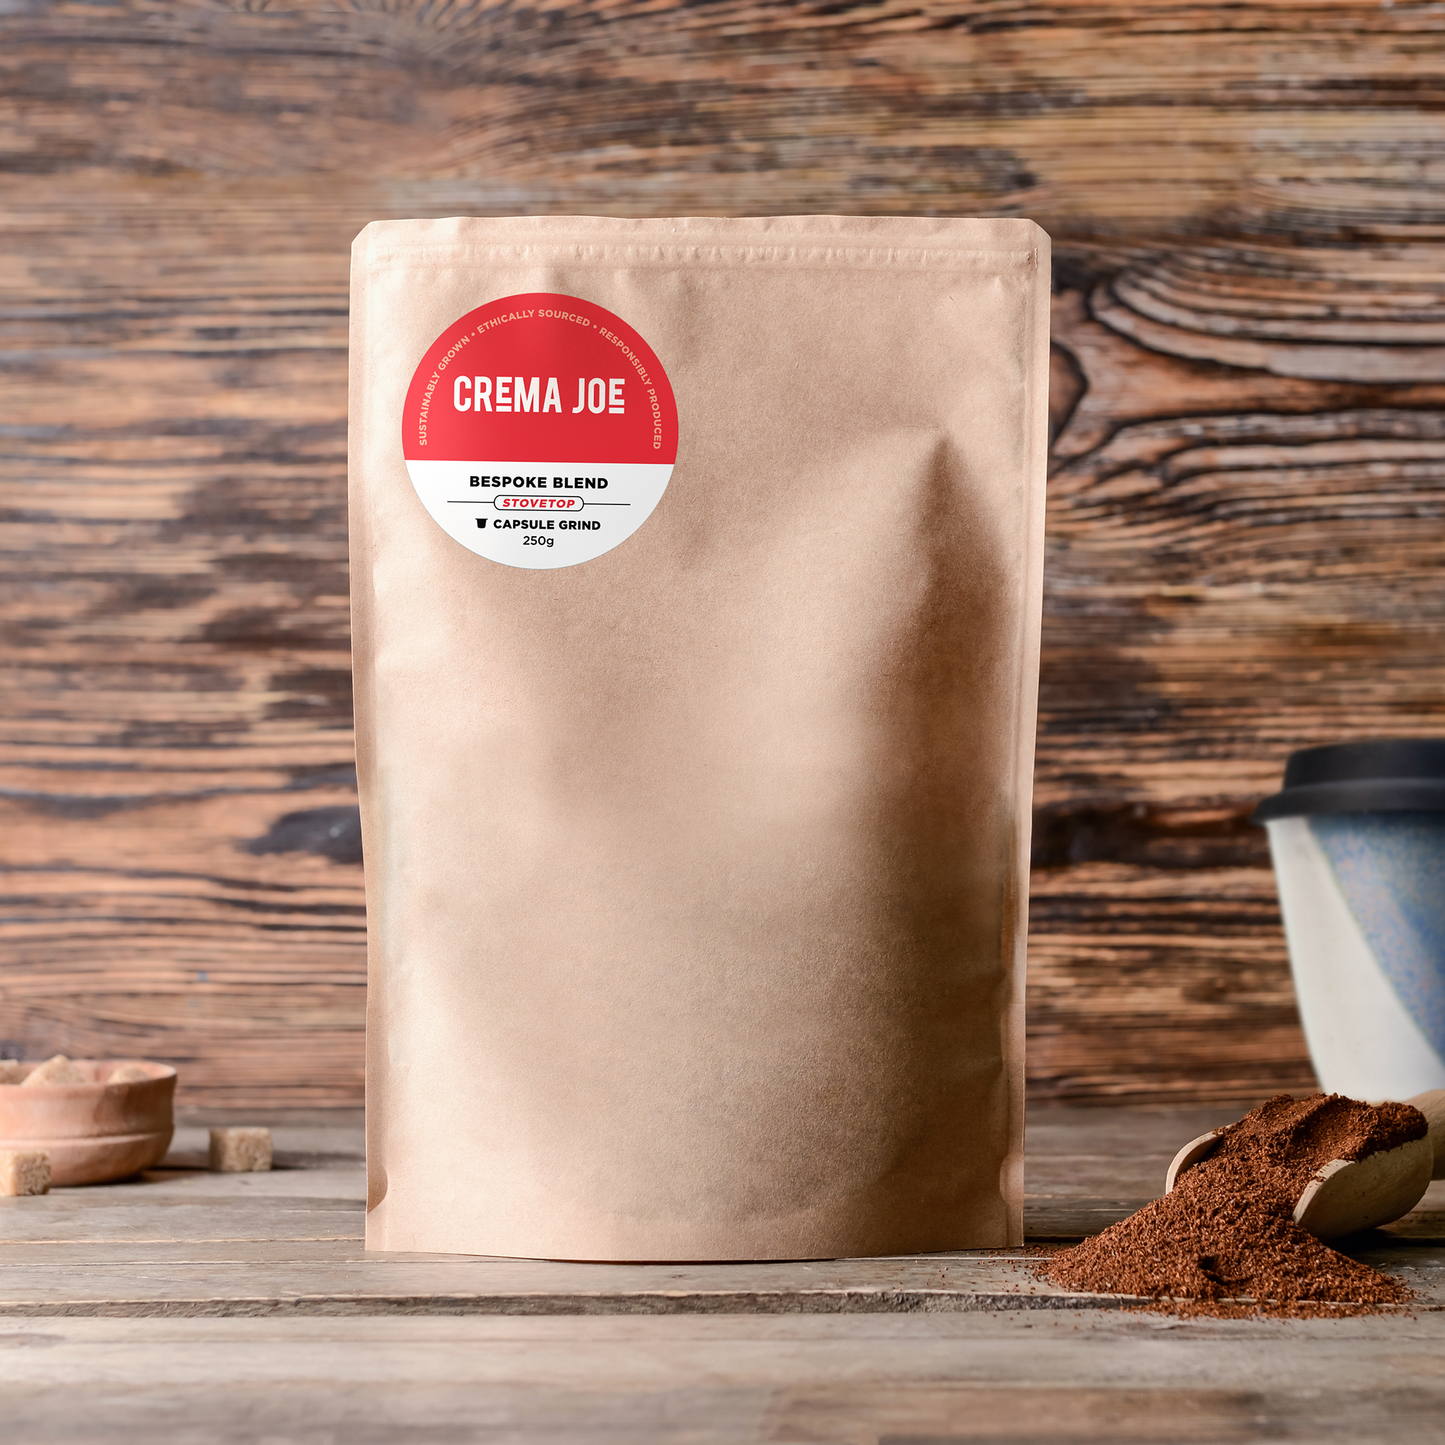 Dark roasted coffee - perfect for reusable coffee pods & capsules